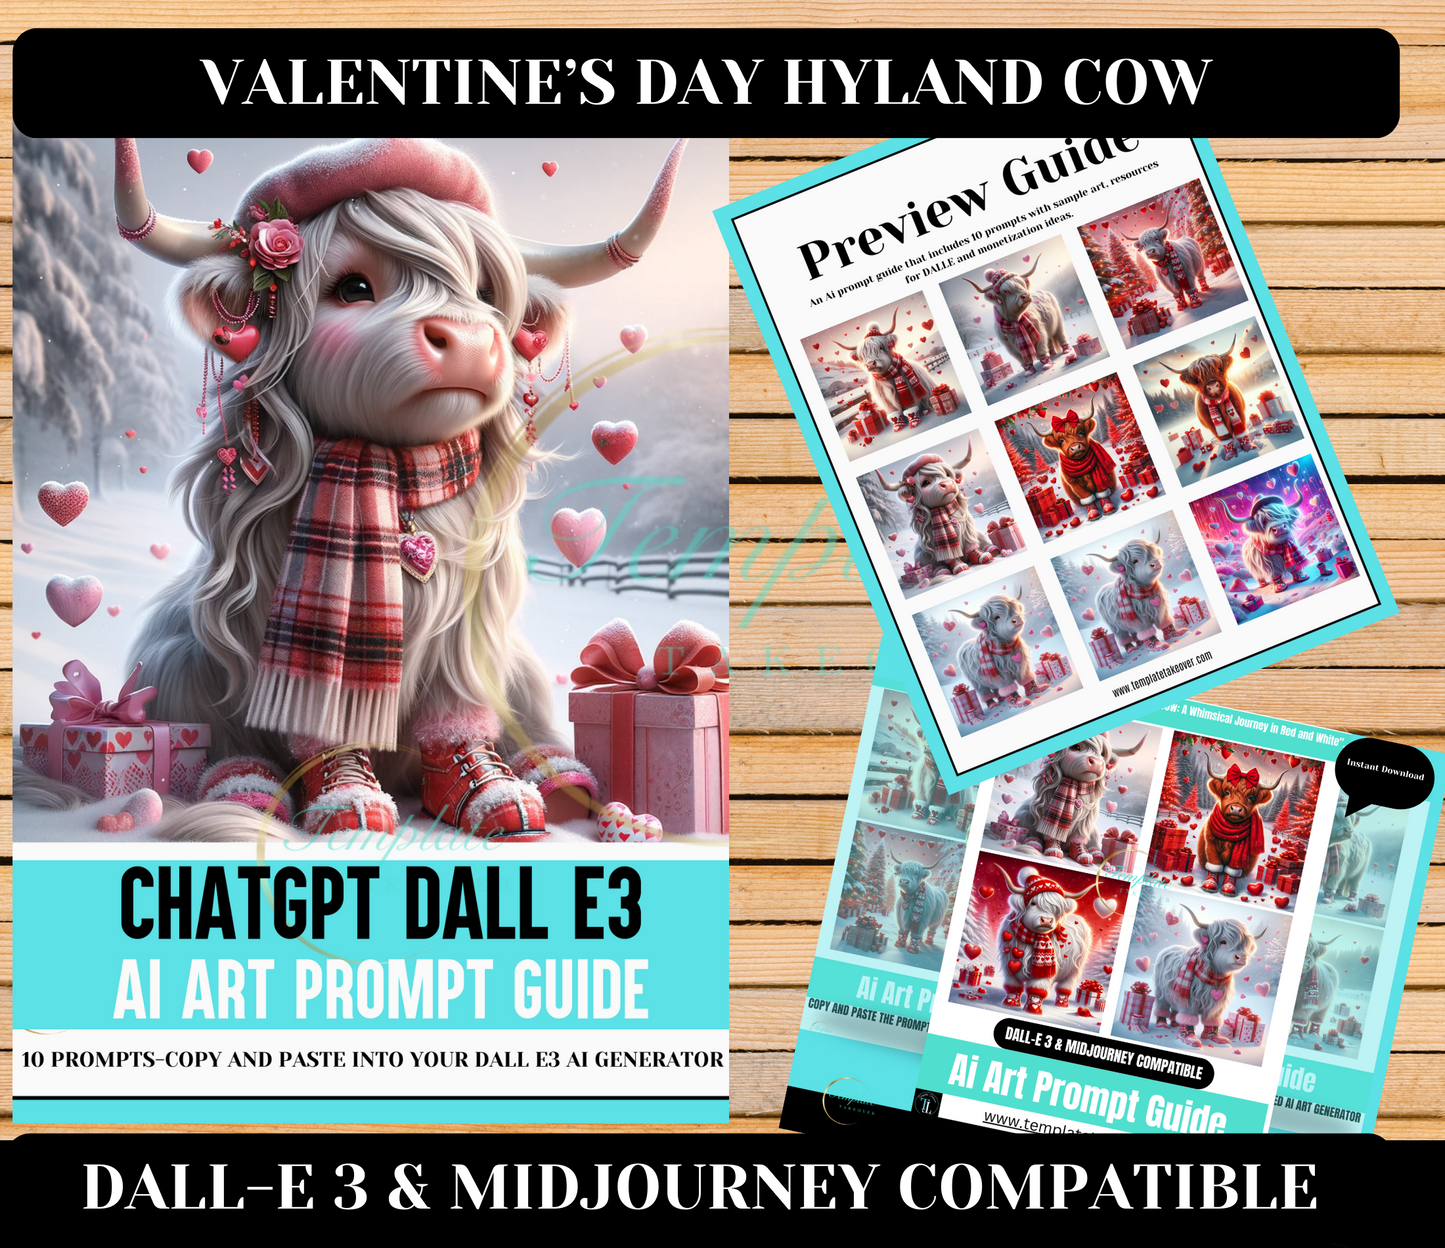 Enchanted Valentine's Day Highland Cow Prompt Guide!